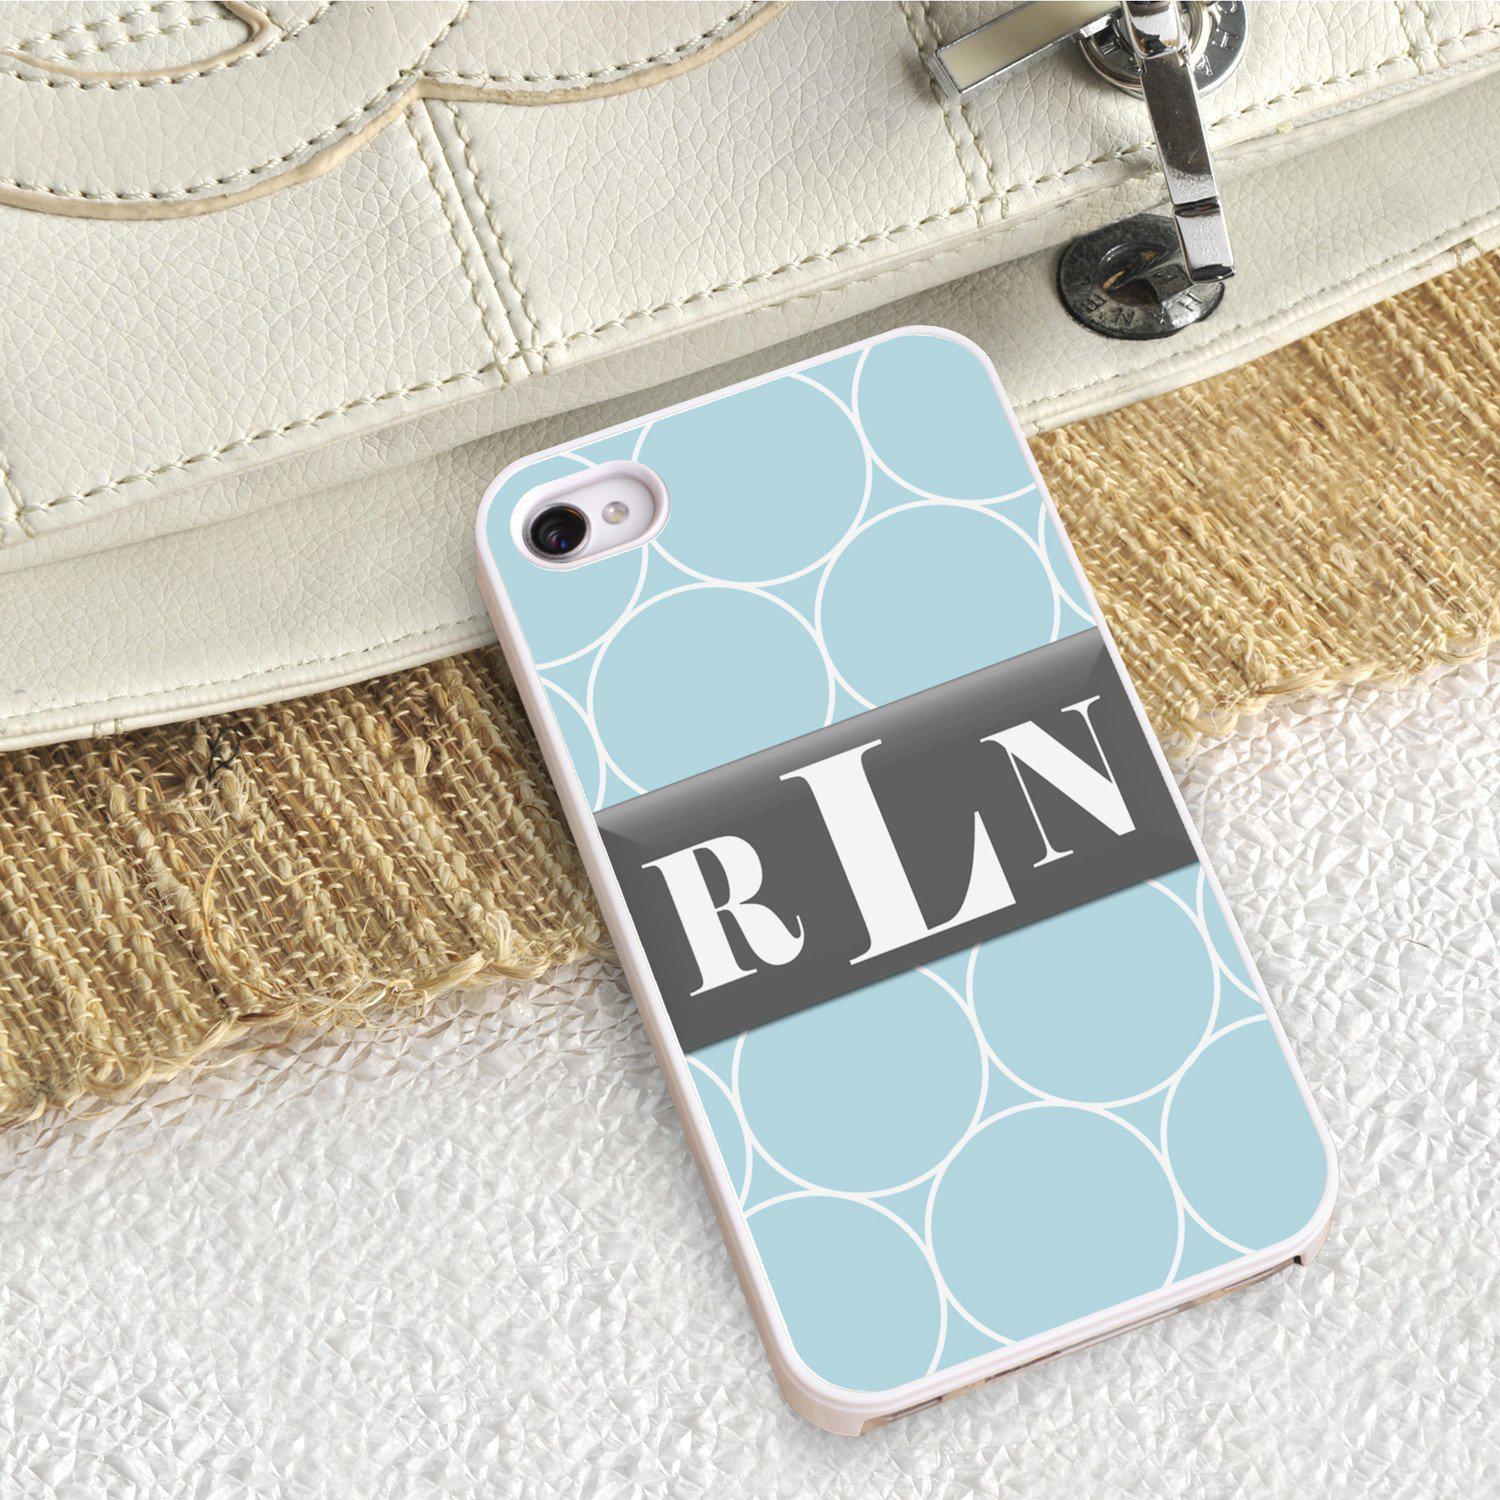 Personalized White Trimmed iPhone Cover - 3 letter monogram